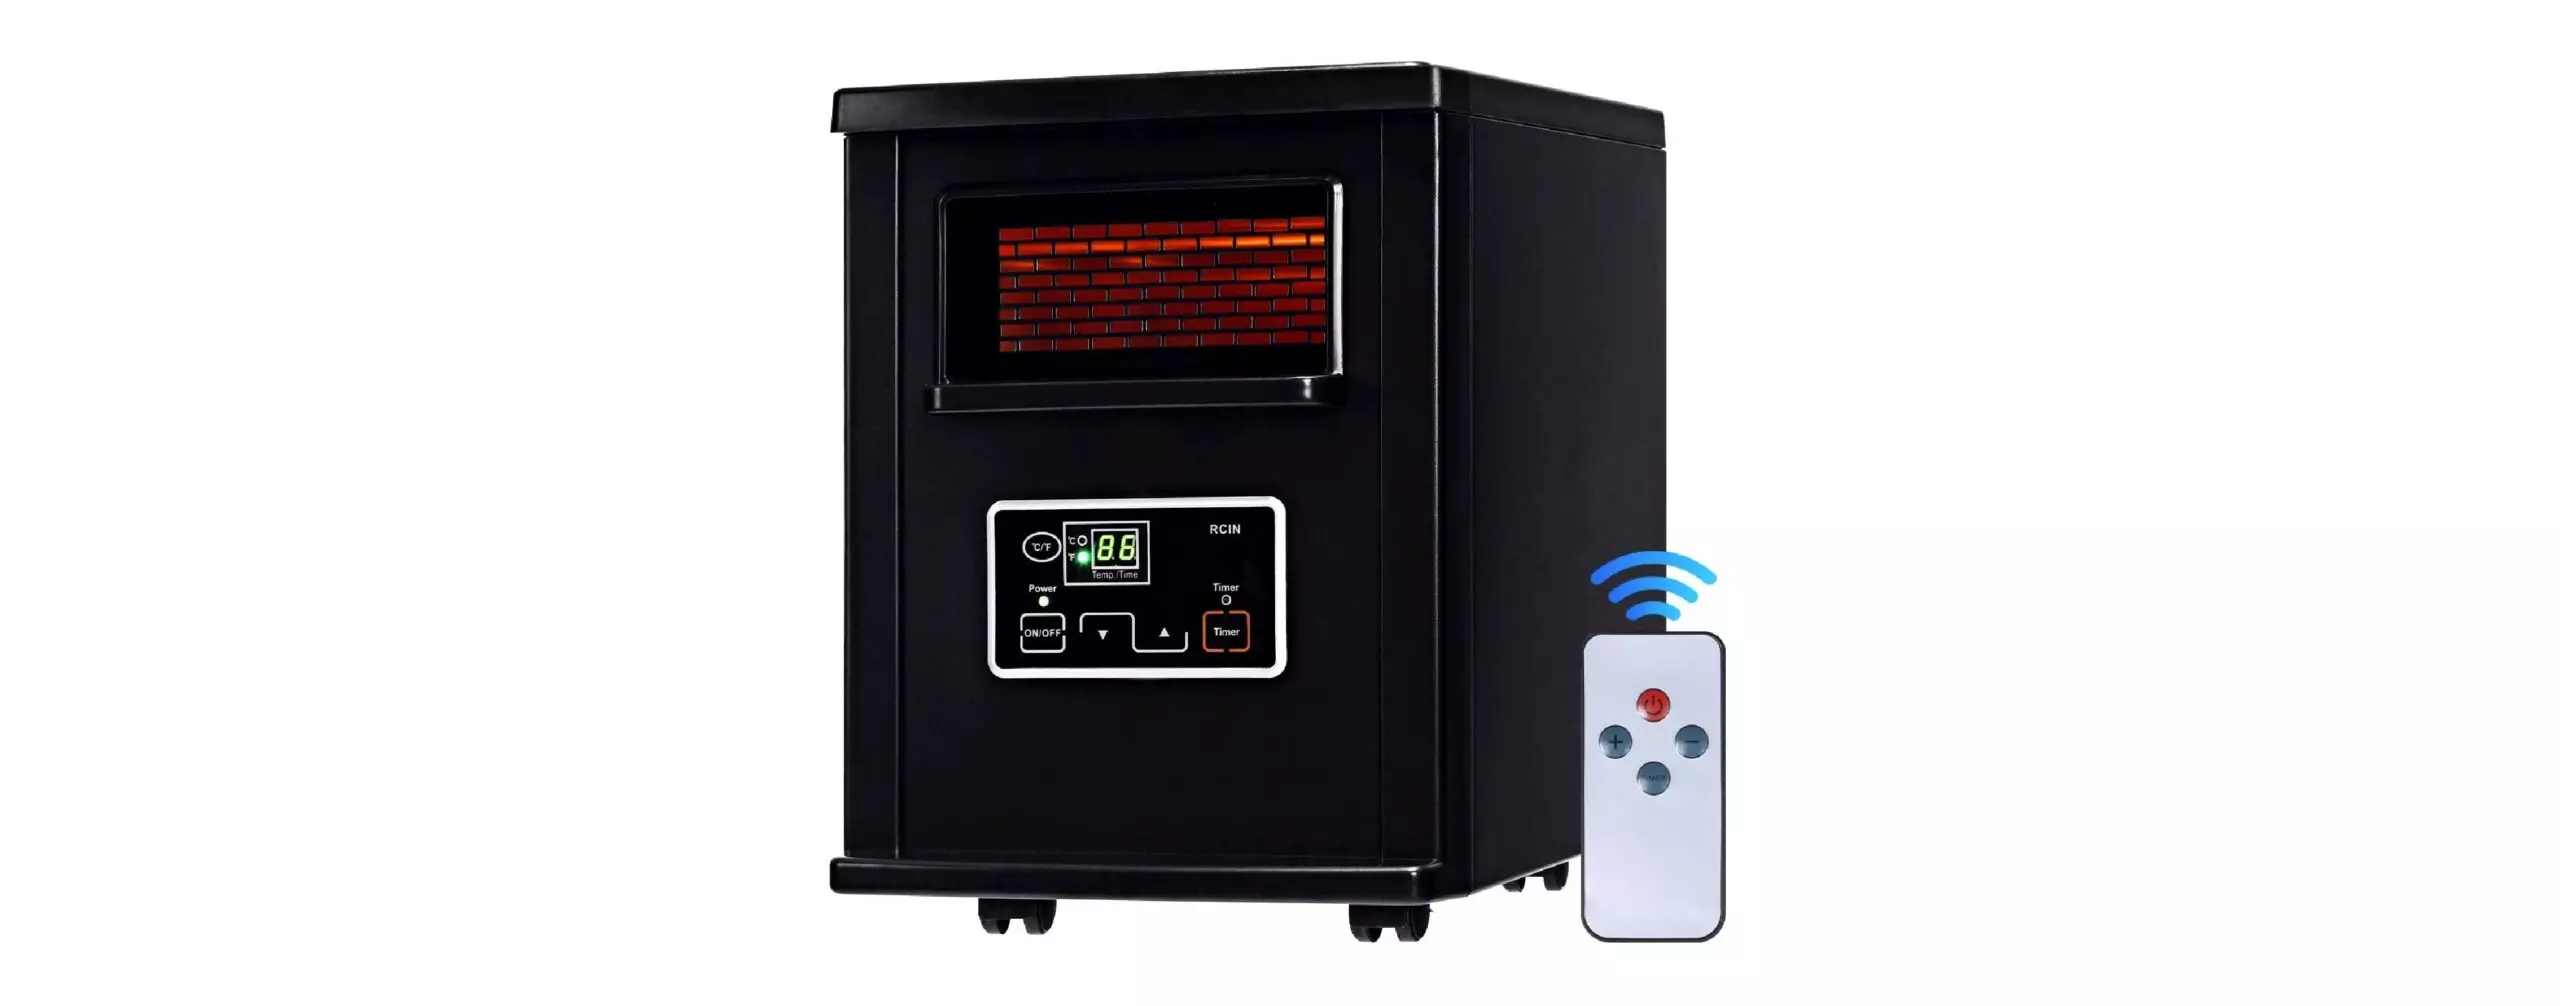 The Best Infrared Heaters (Review & Buying Guide) 2021